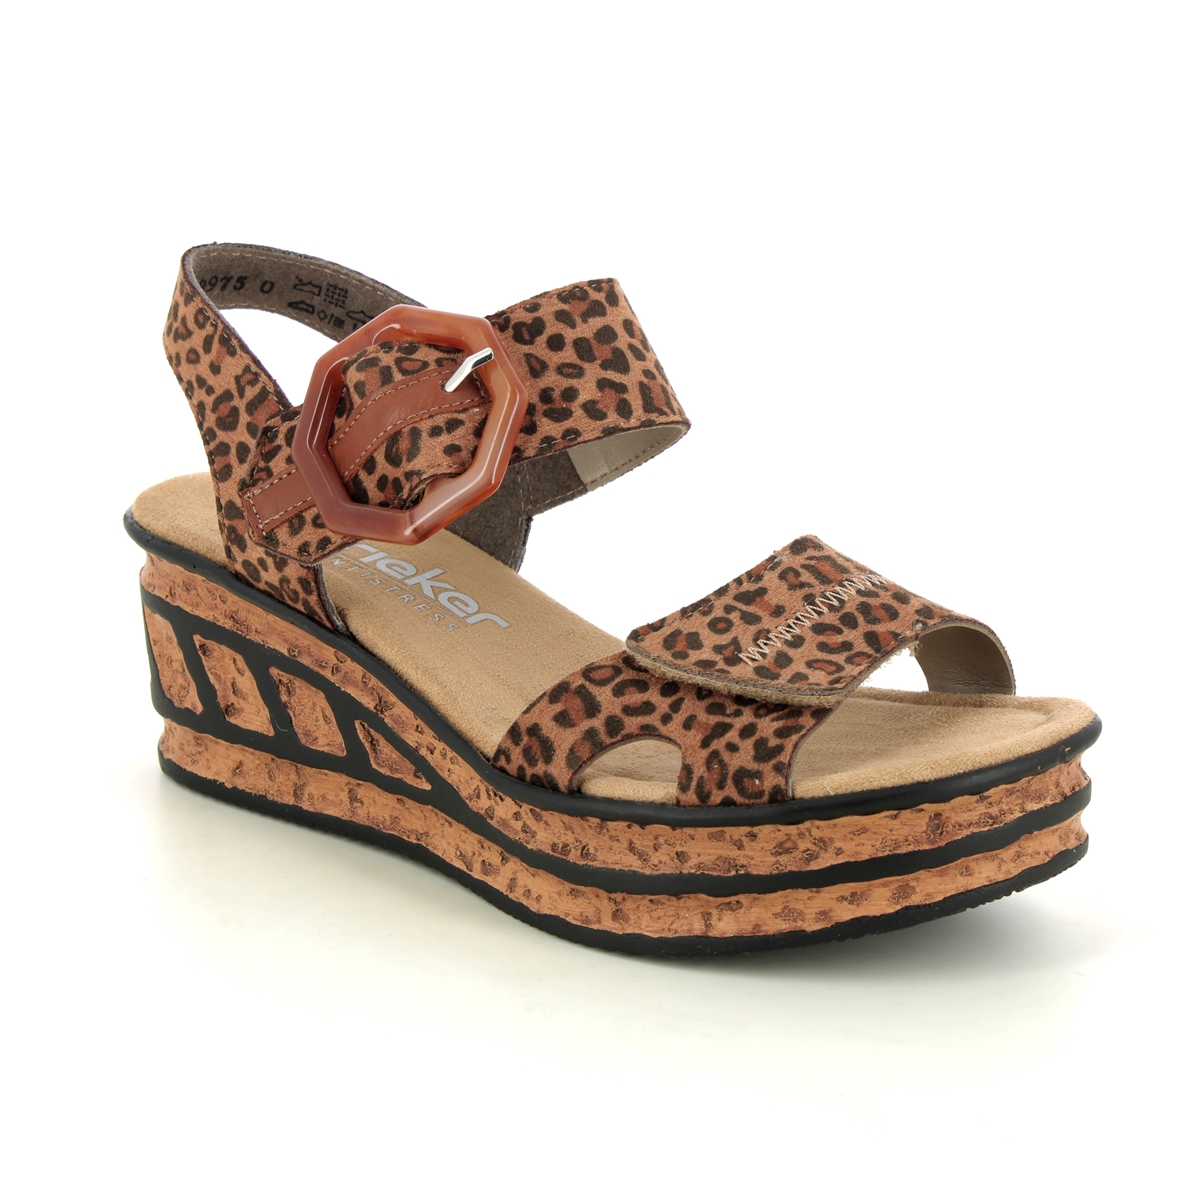 Rieker 68176-90 Leopard print Womens Wedge Sandals in a Plain Man-made in Size 37